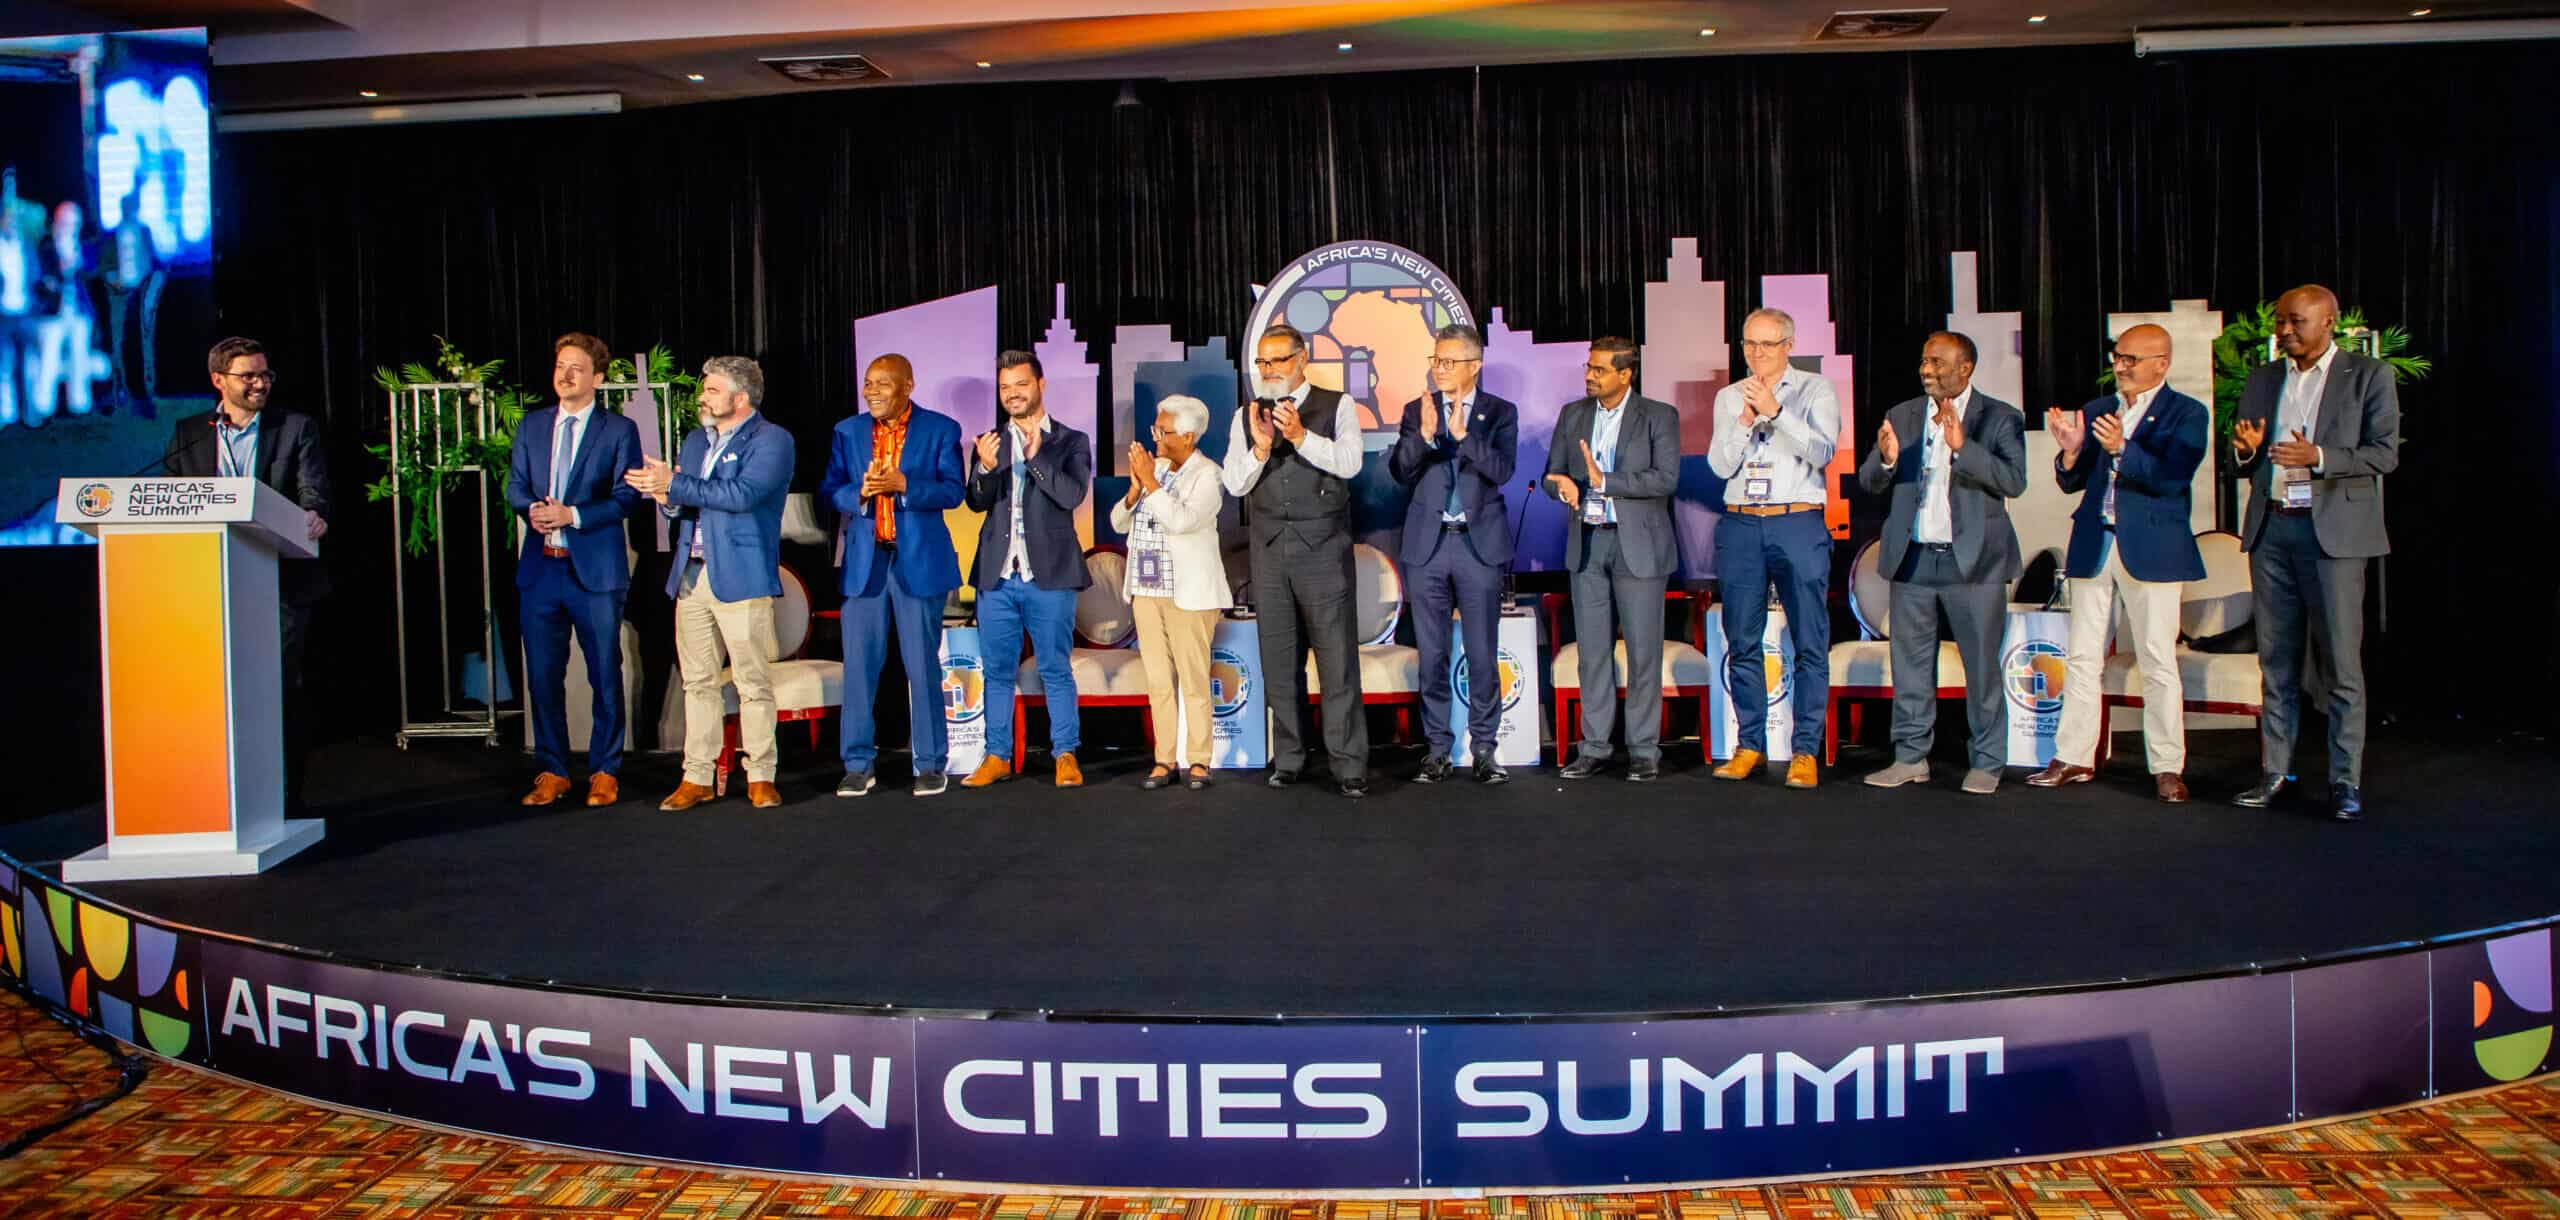 MOU Signee's at Africa's New Cities Summit